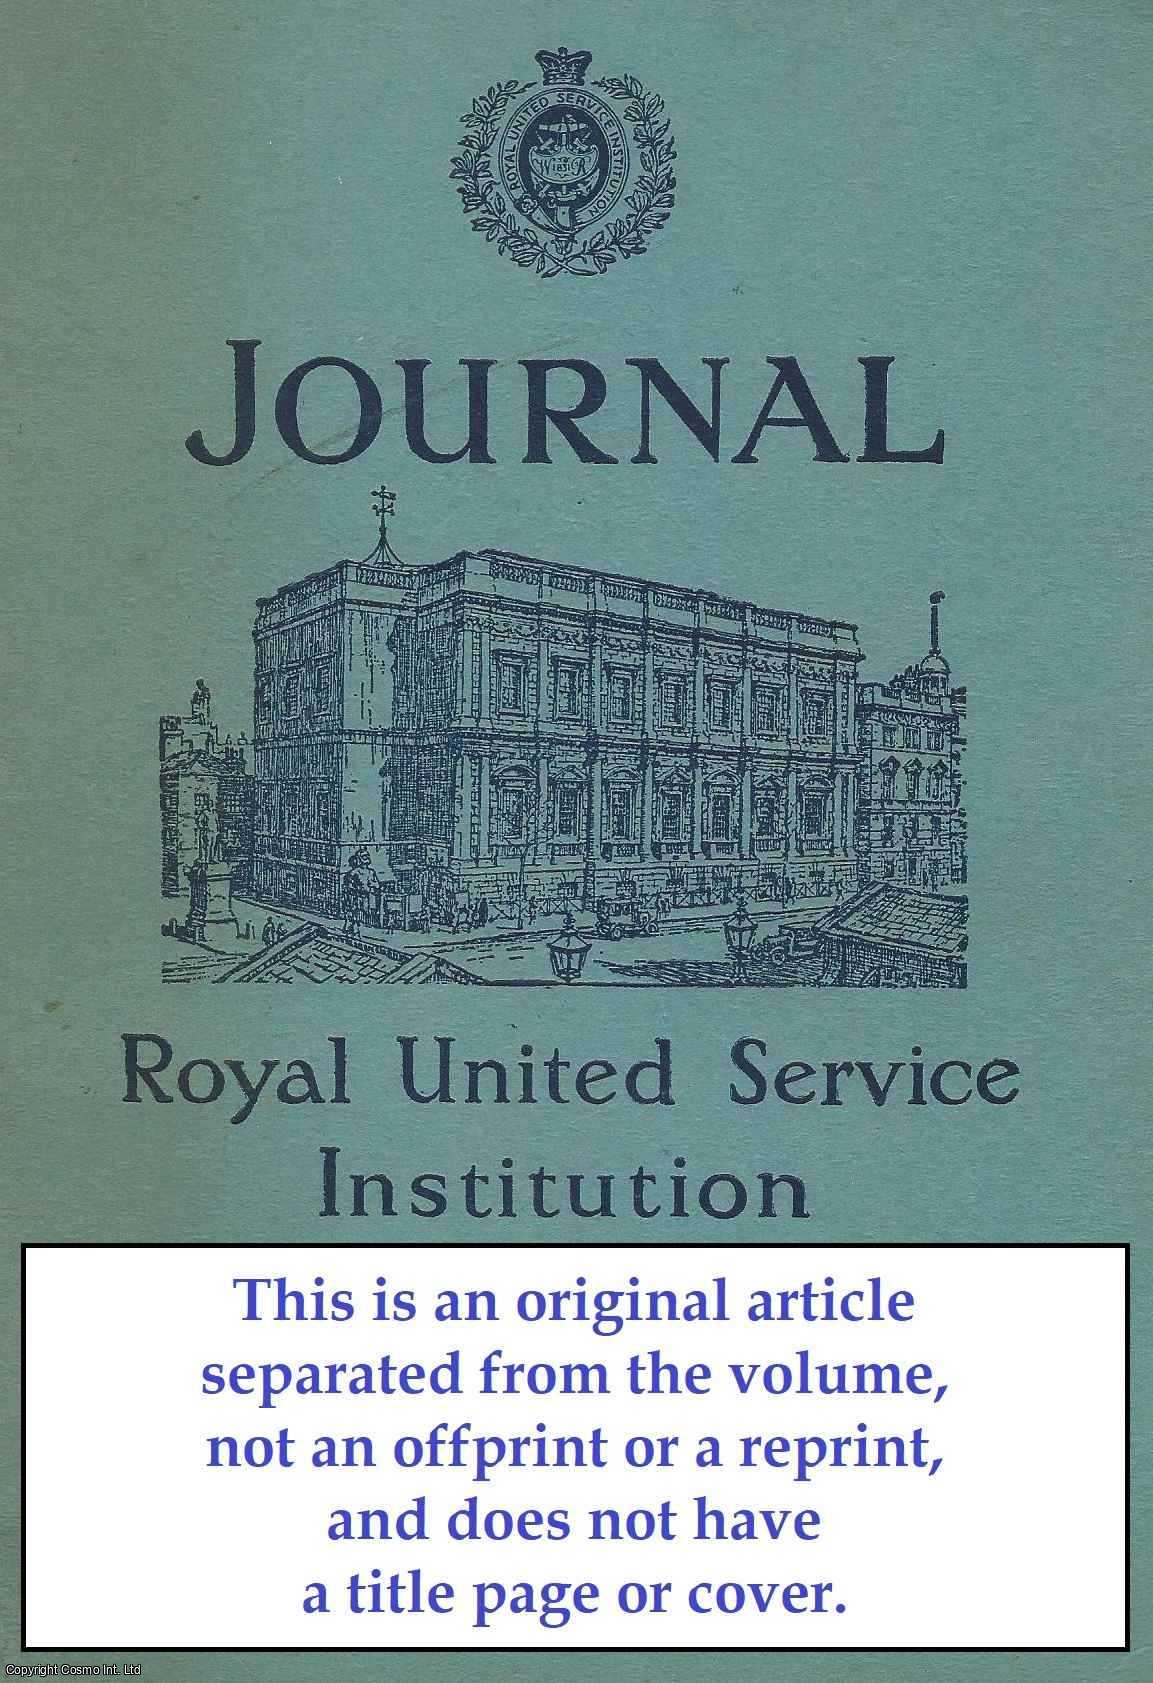 J. E. Adair - New Trends in Leadership and Management Training. An original article from The Royal United Service Institution Journal, 1967.